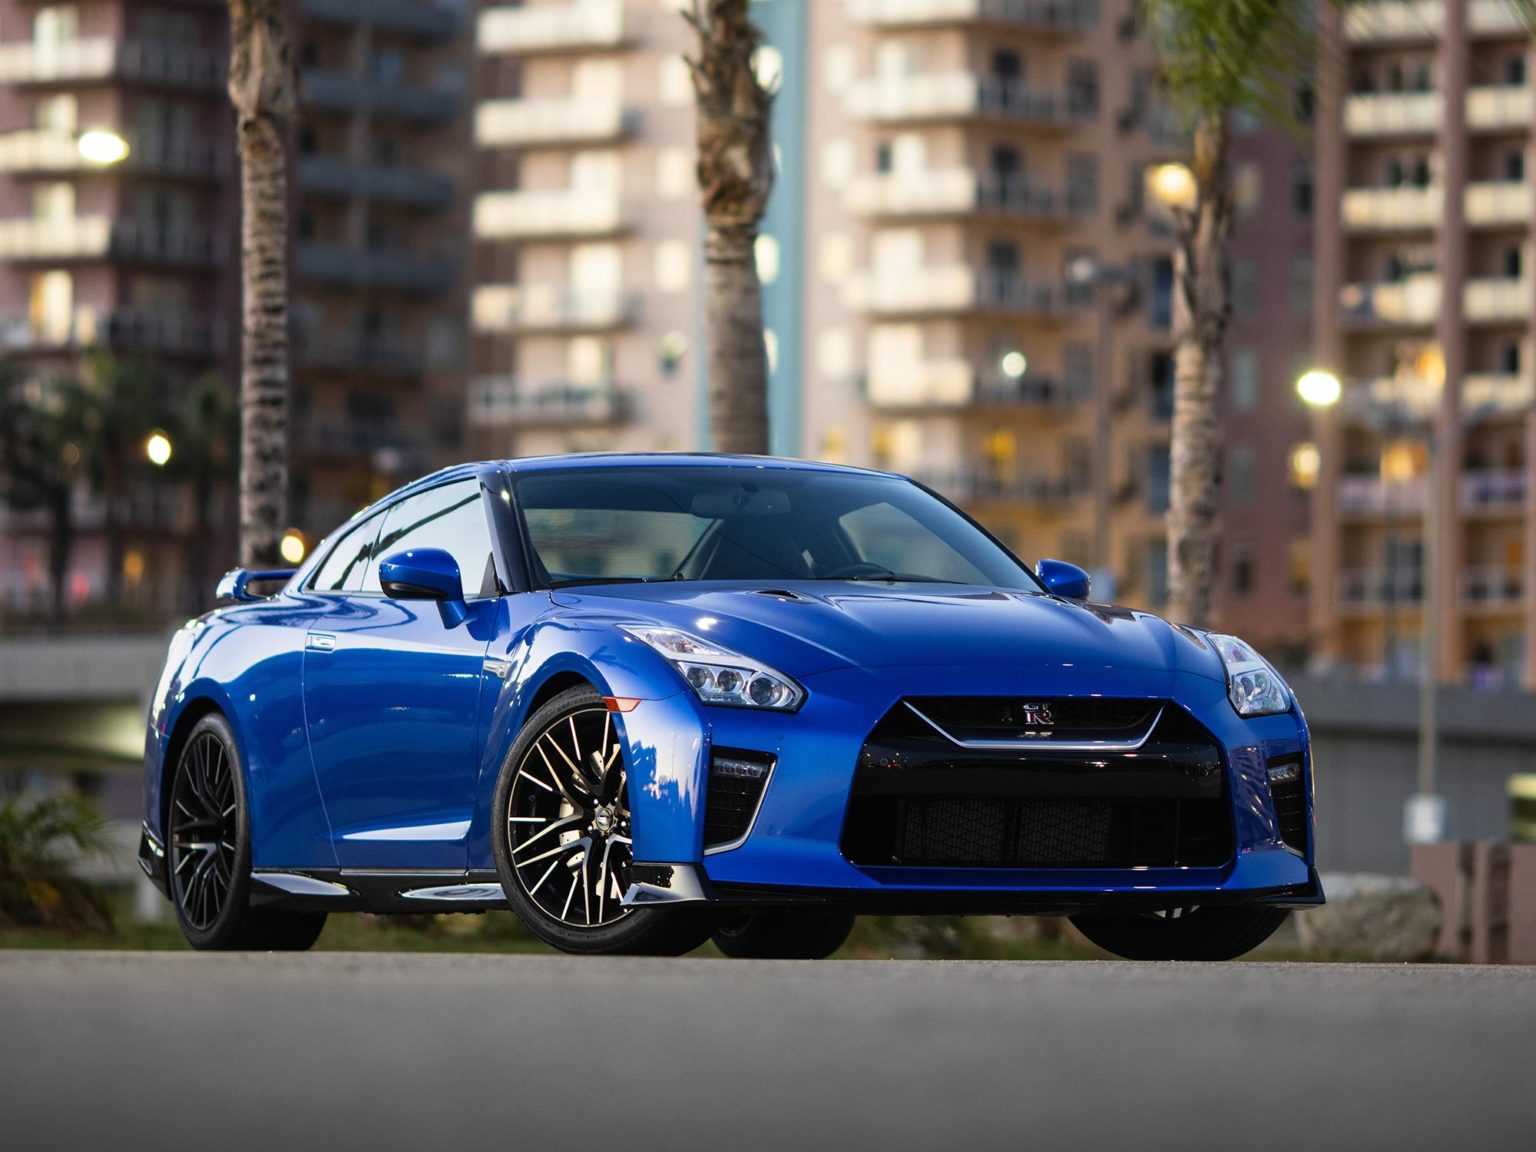 The Nissan GT-R probably isn't the first supercar that comes to mind, but it's worthy of consideration if you're not all about being seen.